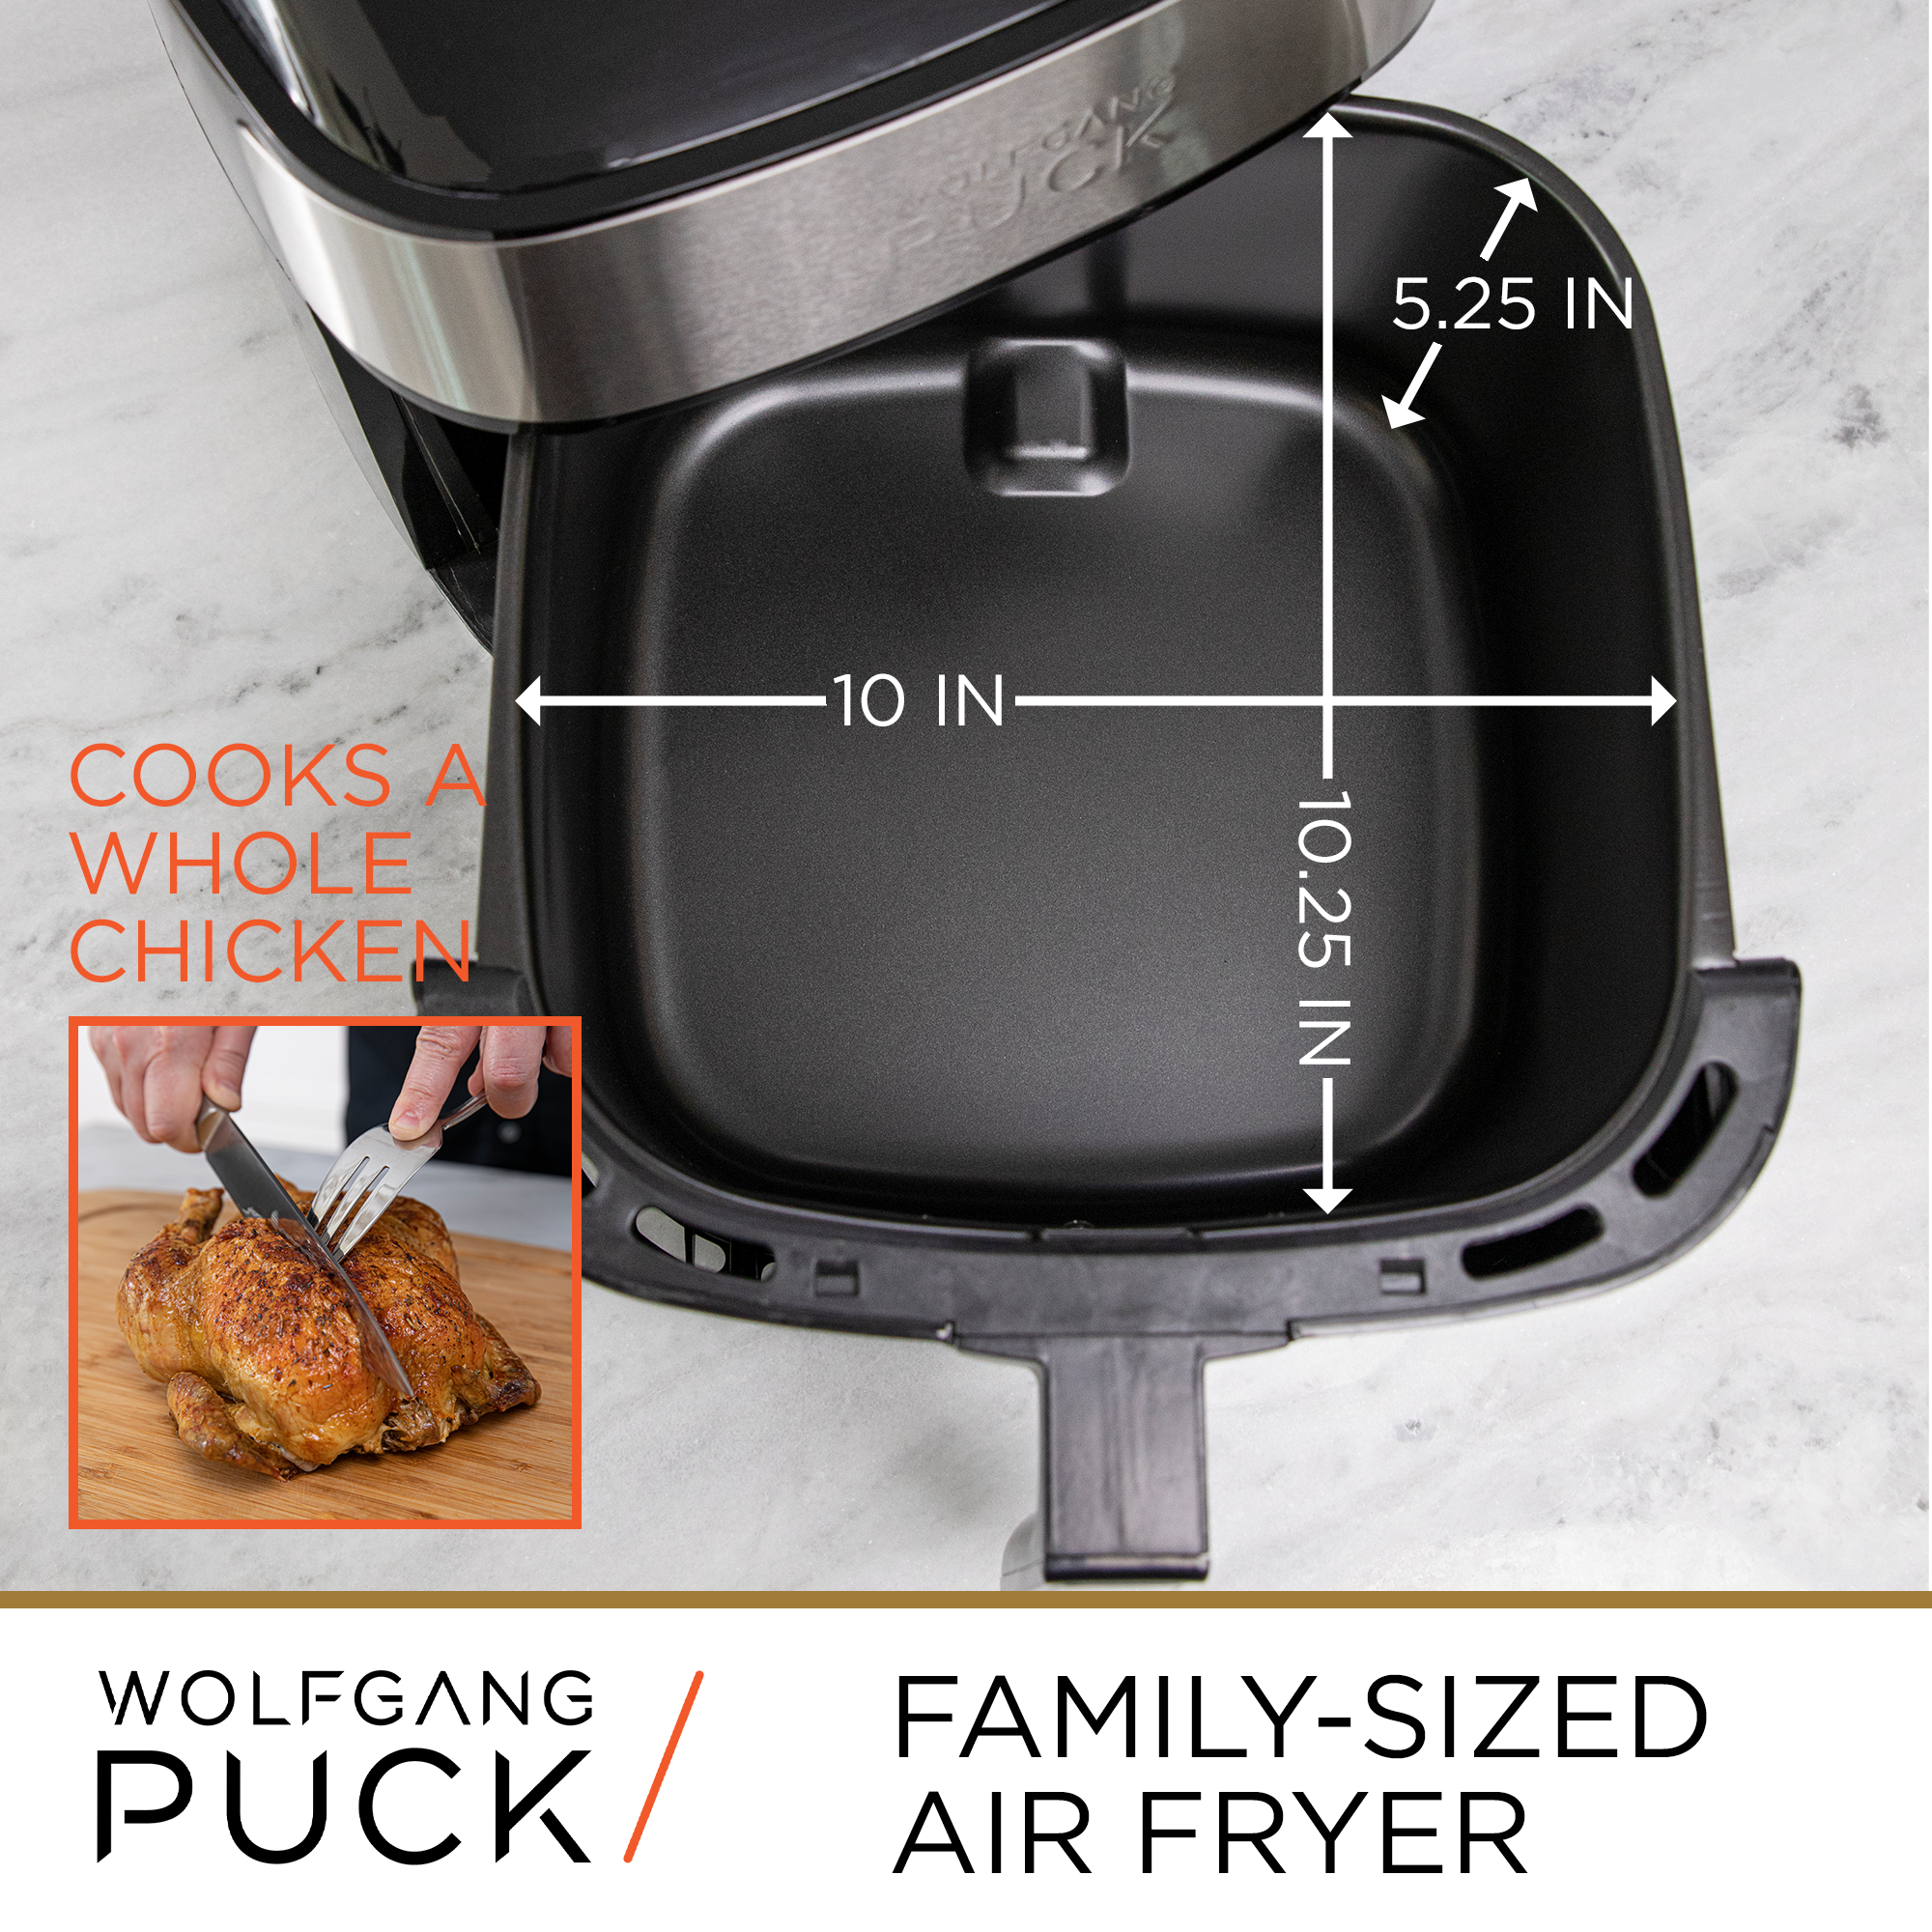 family-sized air fryer by Wolfgang Puck